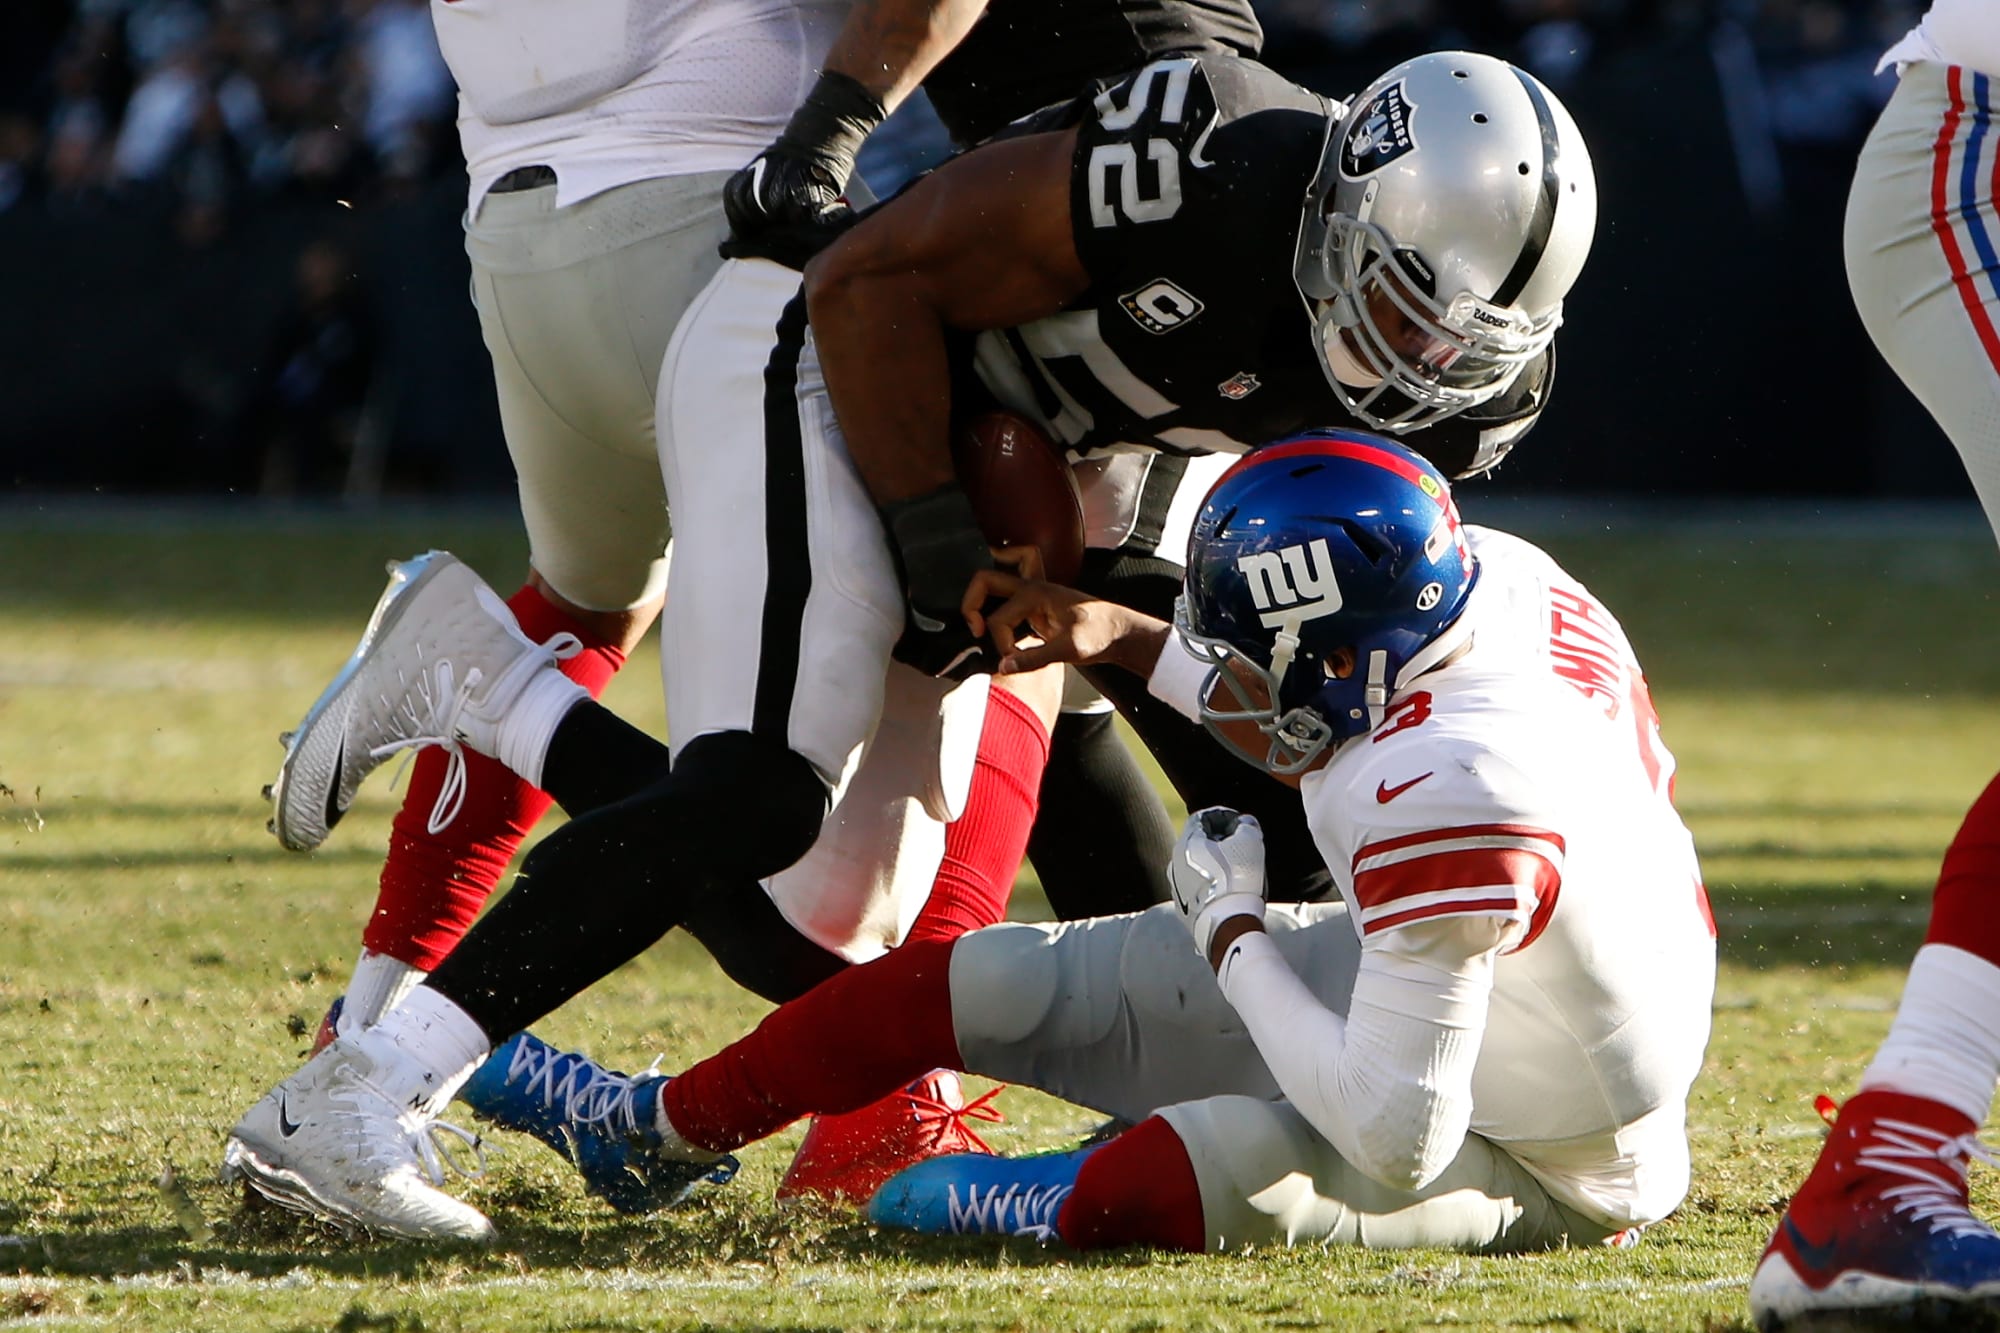 5 takeaways from Oakland Raiders' win over New York Giants